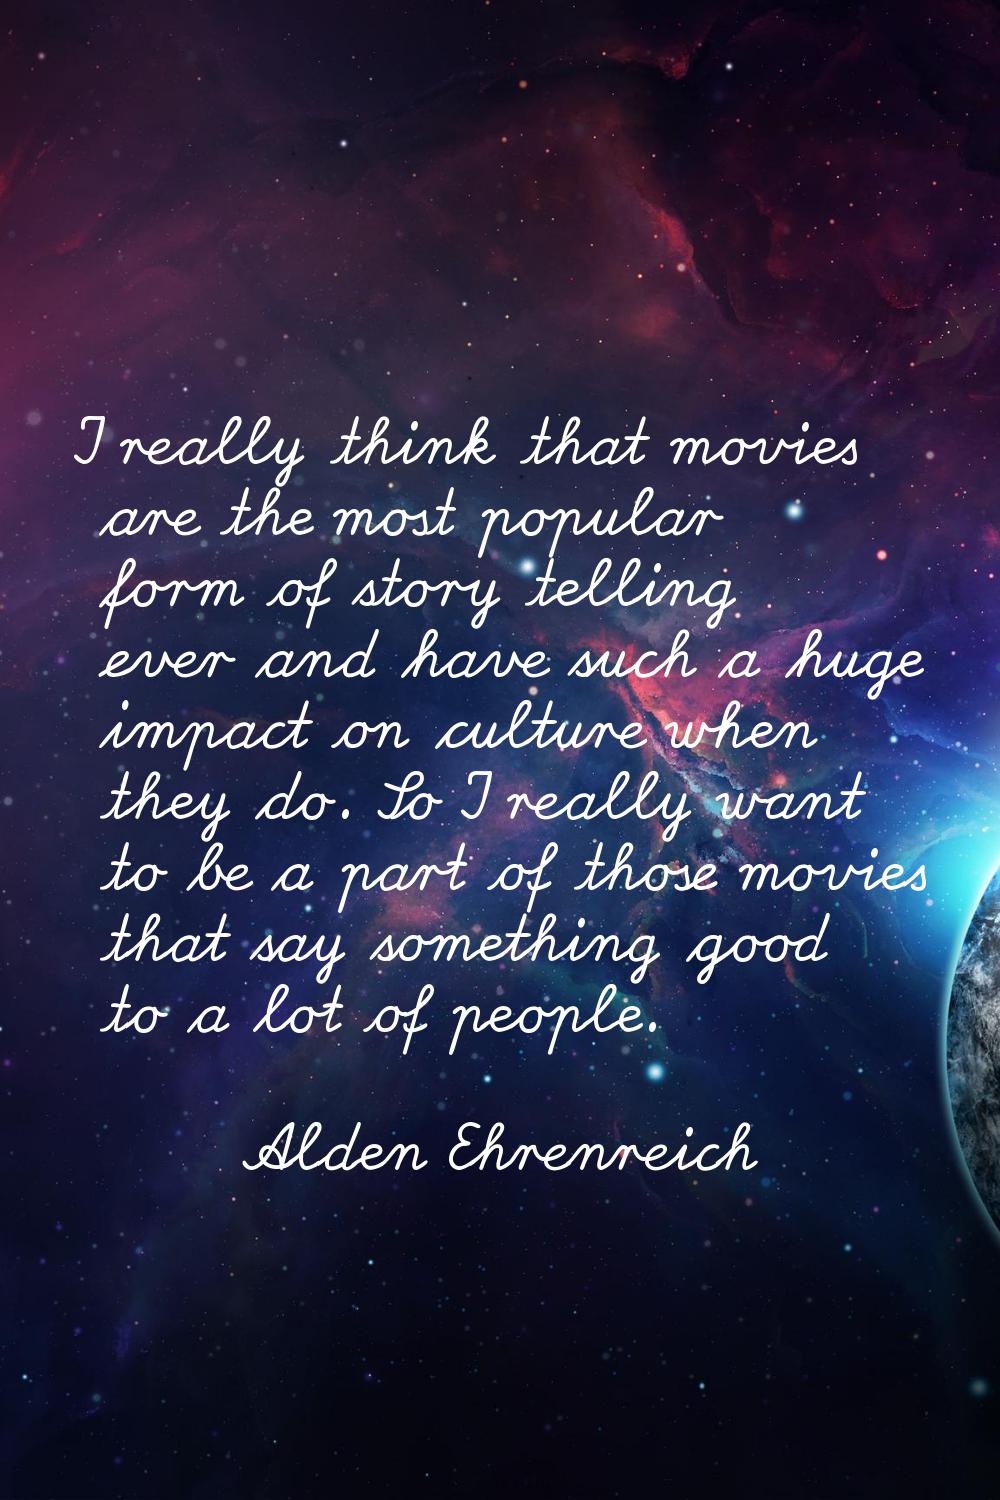 I really think that movies are the most popular form of story telling ever and have such a huge imp